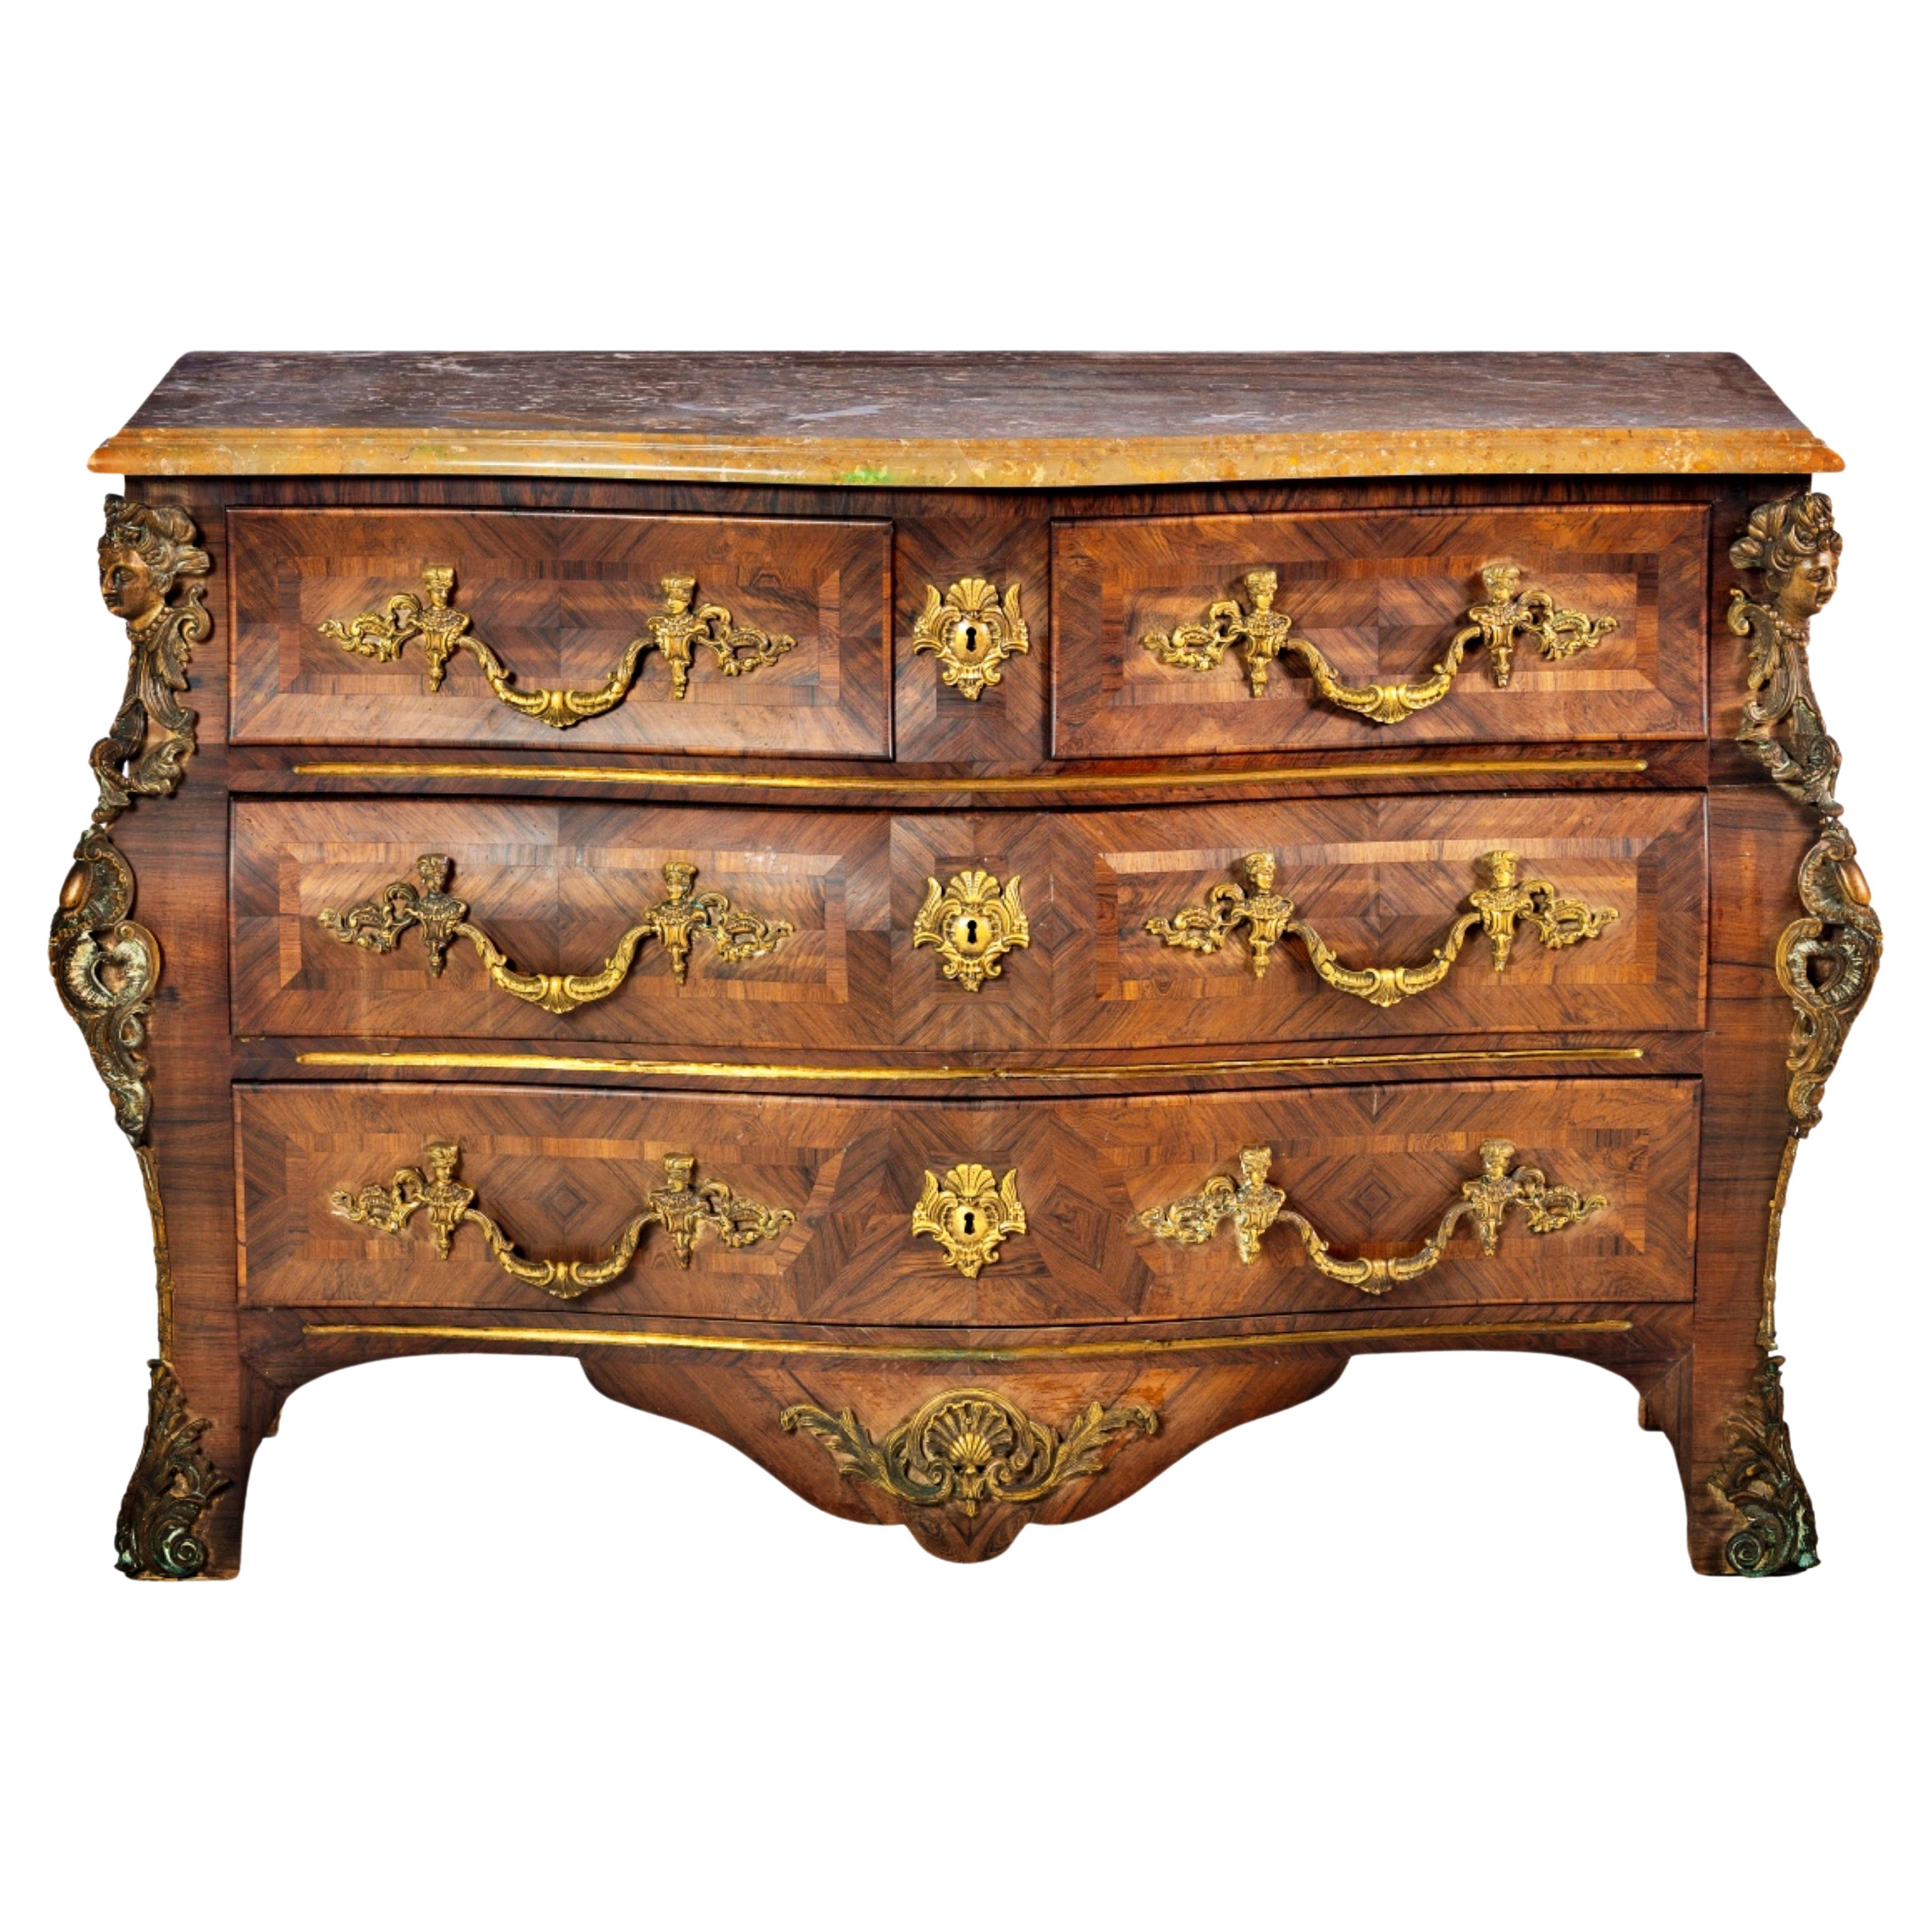 LOUIS XV Style CHEST OF DRAWERS STYLE  Französisch, Ende 19.Jh./20.Jh.